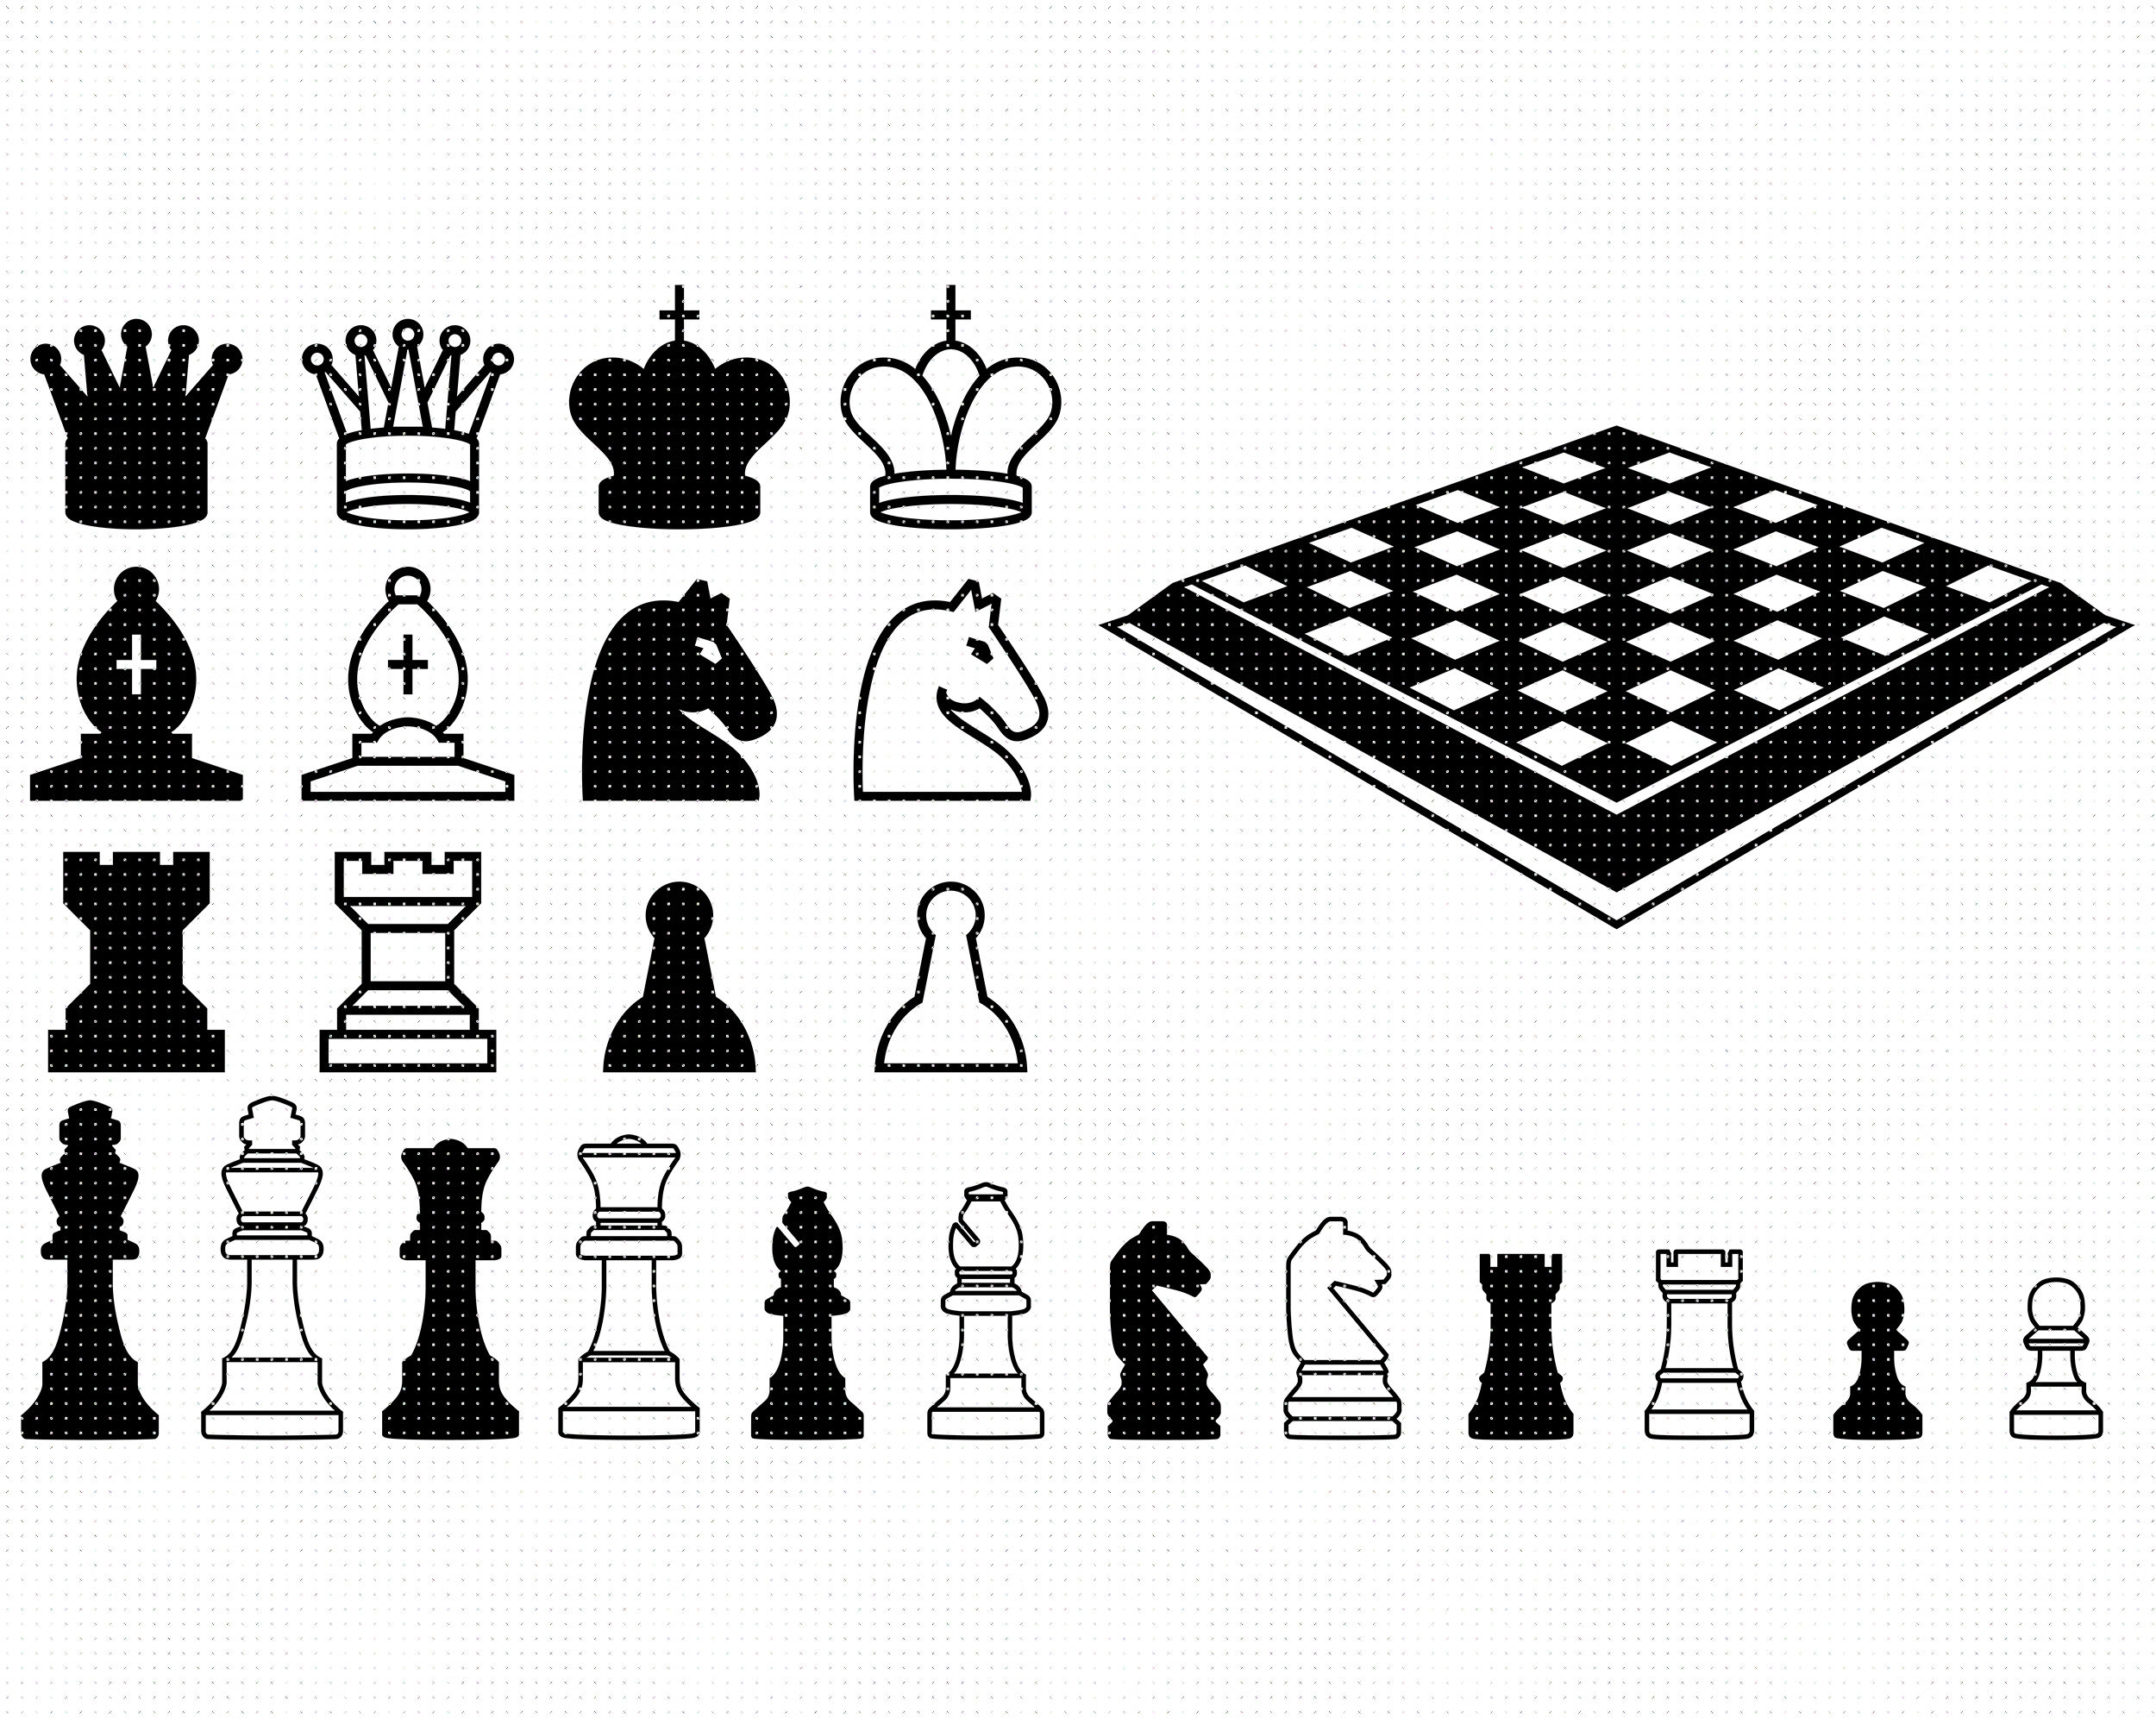 CHESS PIECES Royalty Free Stock SVG Vector and Clip Art